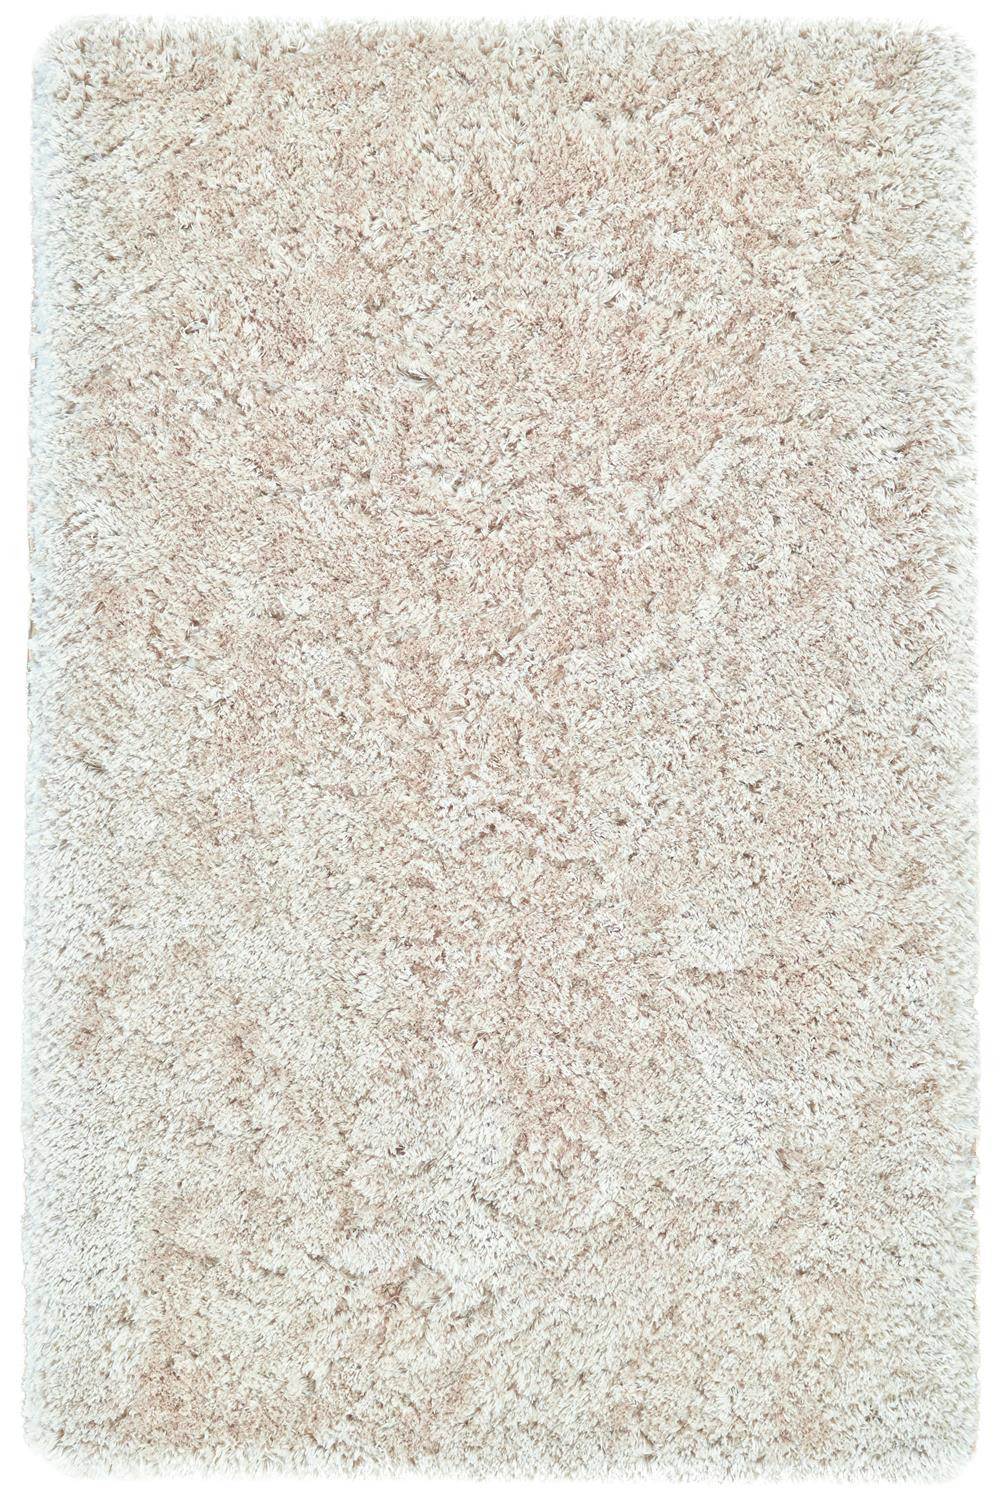 2' X 3' Tan And Taupe Shag Tufted Handmade Stain Resistant Area Rug-511136-1